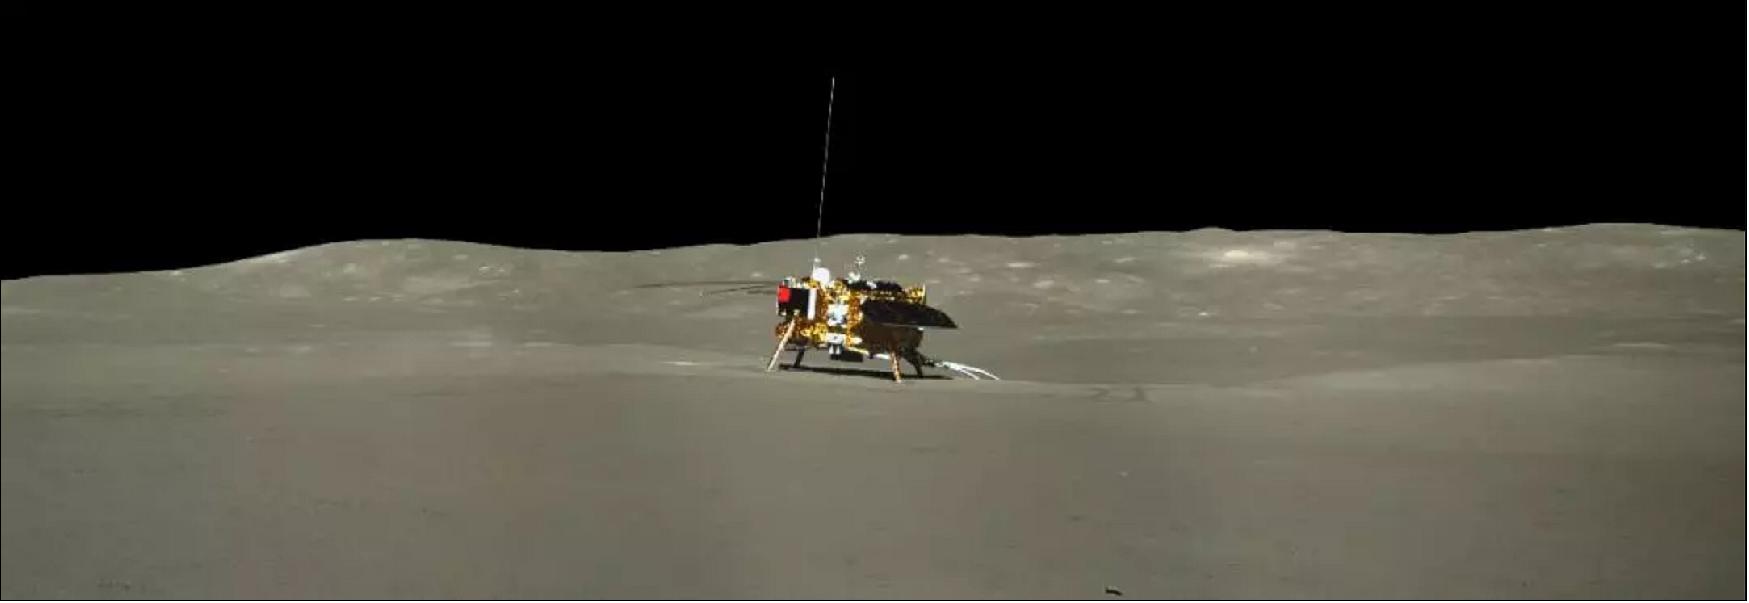 Figure 22: Artist's rendition of the Chang'e-4 lander on the moon. China’s Chang’e-4 mission on the far side of the Moon is employing an ESA-developed LEON microprocessor (image credit: ESA)